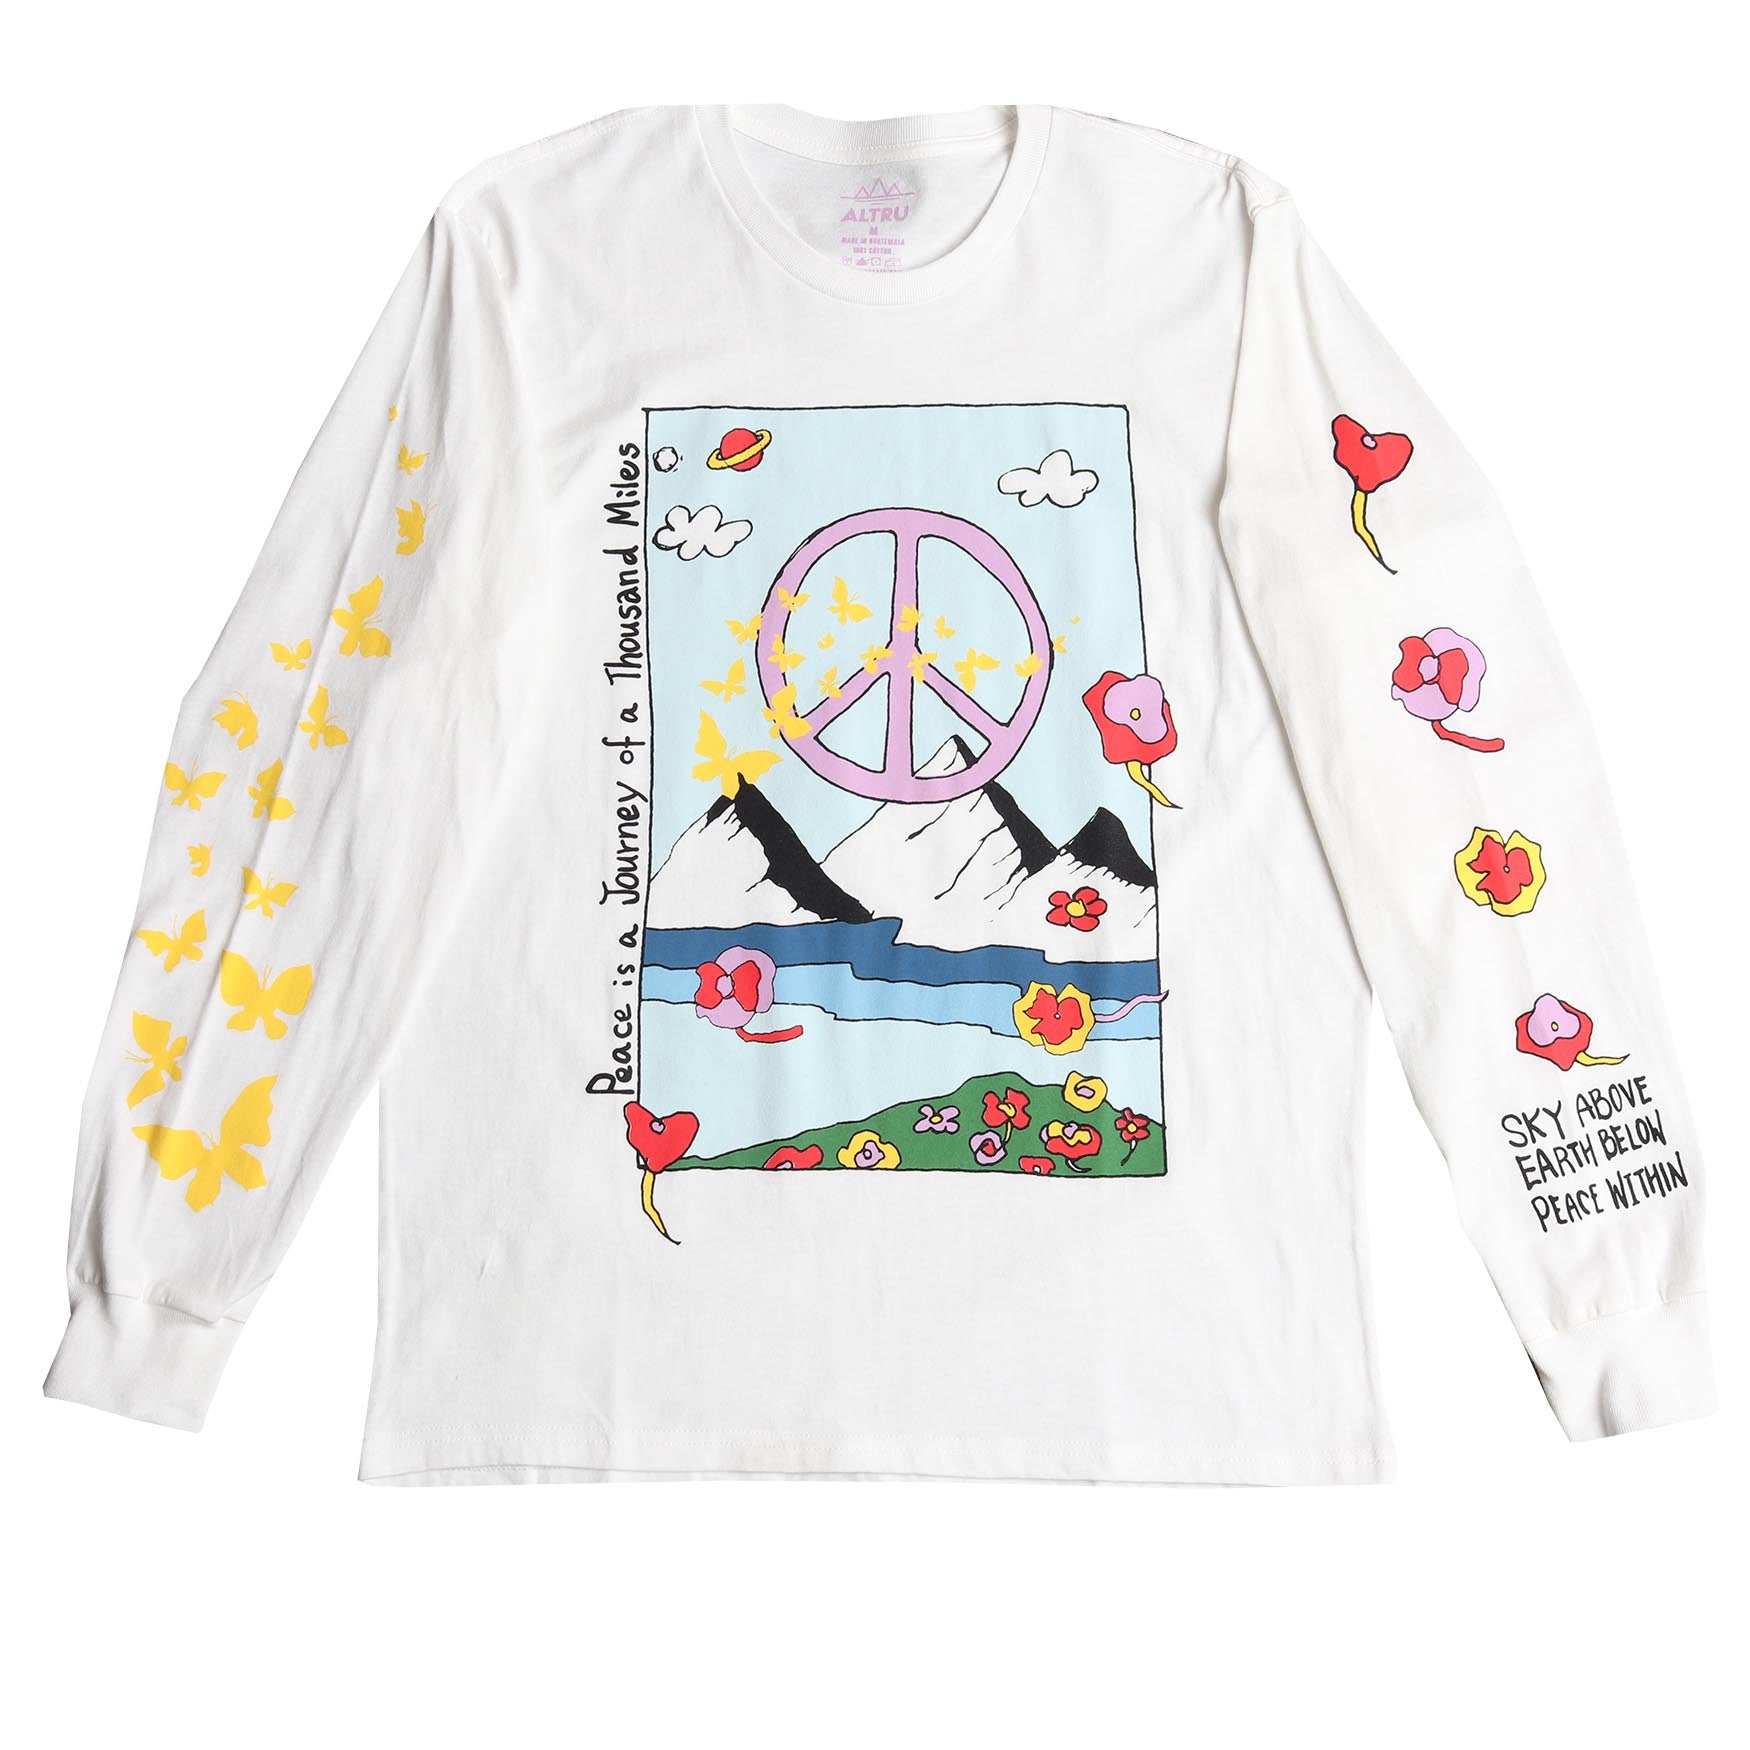 Full front photo of "Peace is a Journey" graphic that includes mountains, flowers, butterflies, space, lake, peace sign and the sky. Graphics are printed on front and sleeves